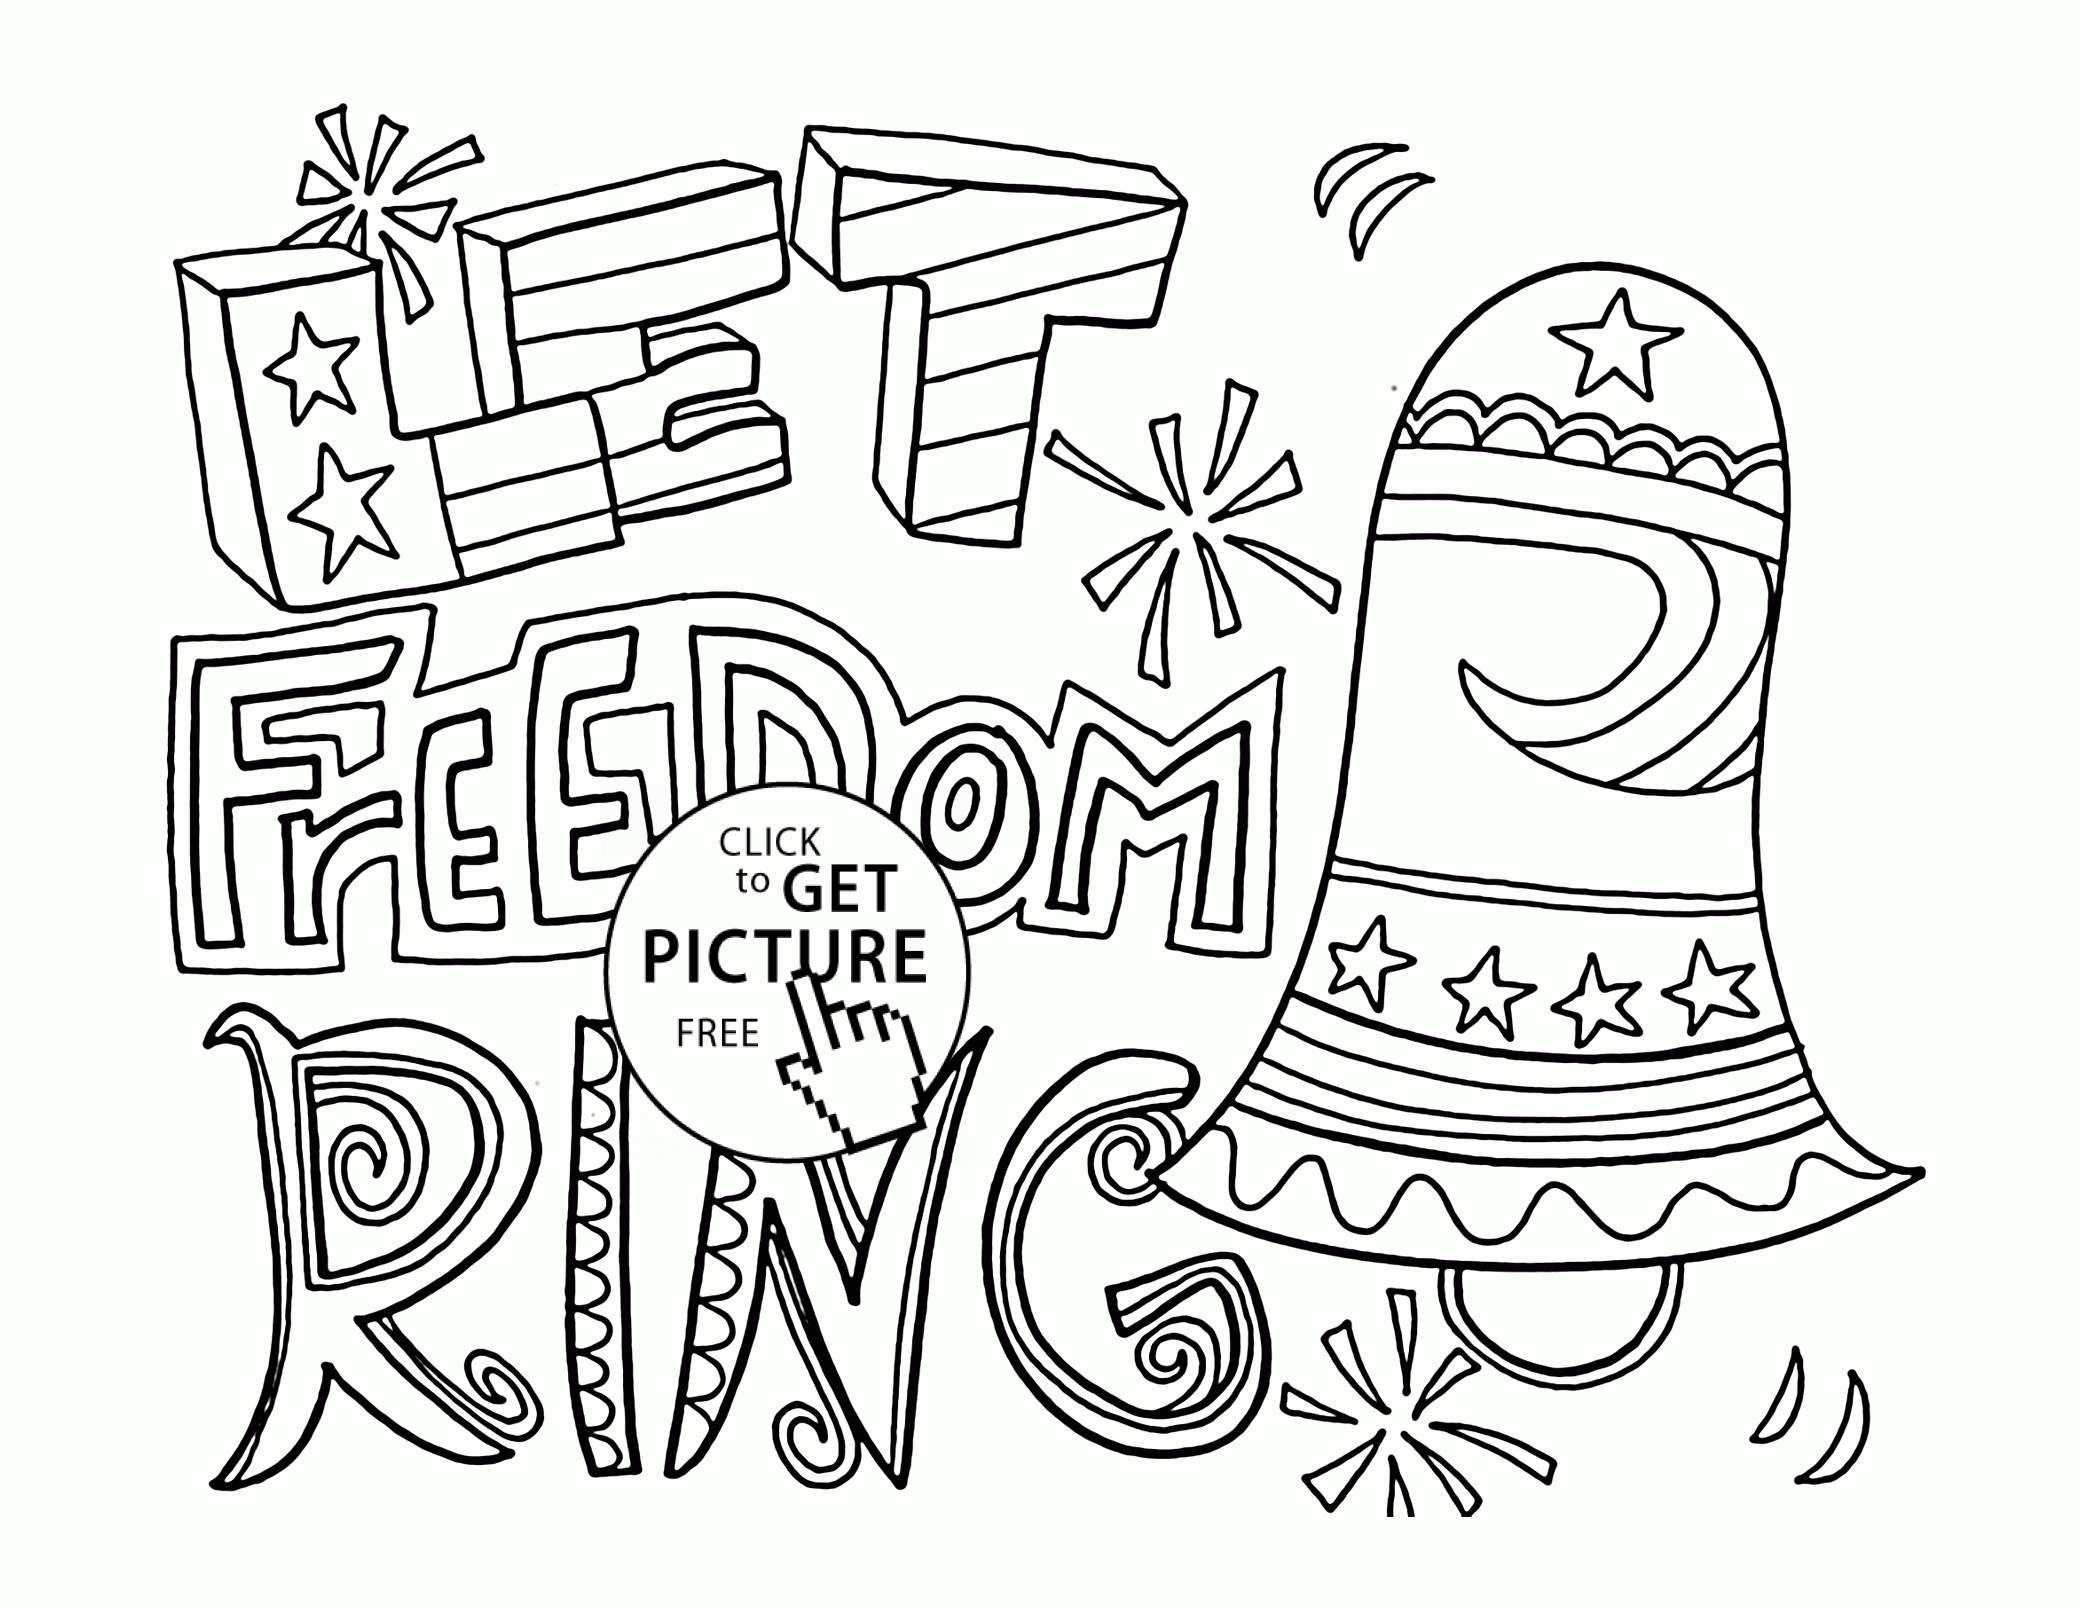 free printable coloring pages 4th of july 4th of july doodle coloring page free printable coloring july pages printable 4th free coloring of 